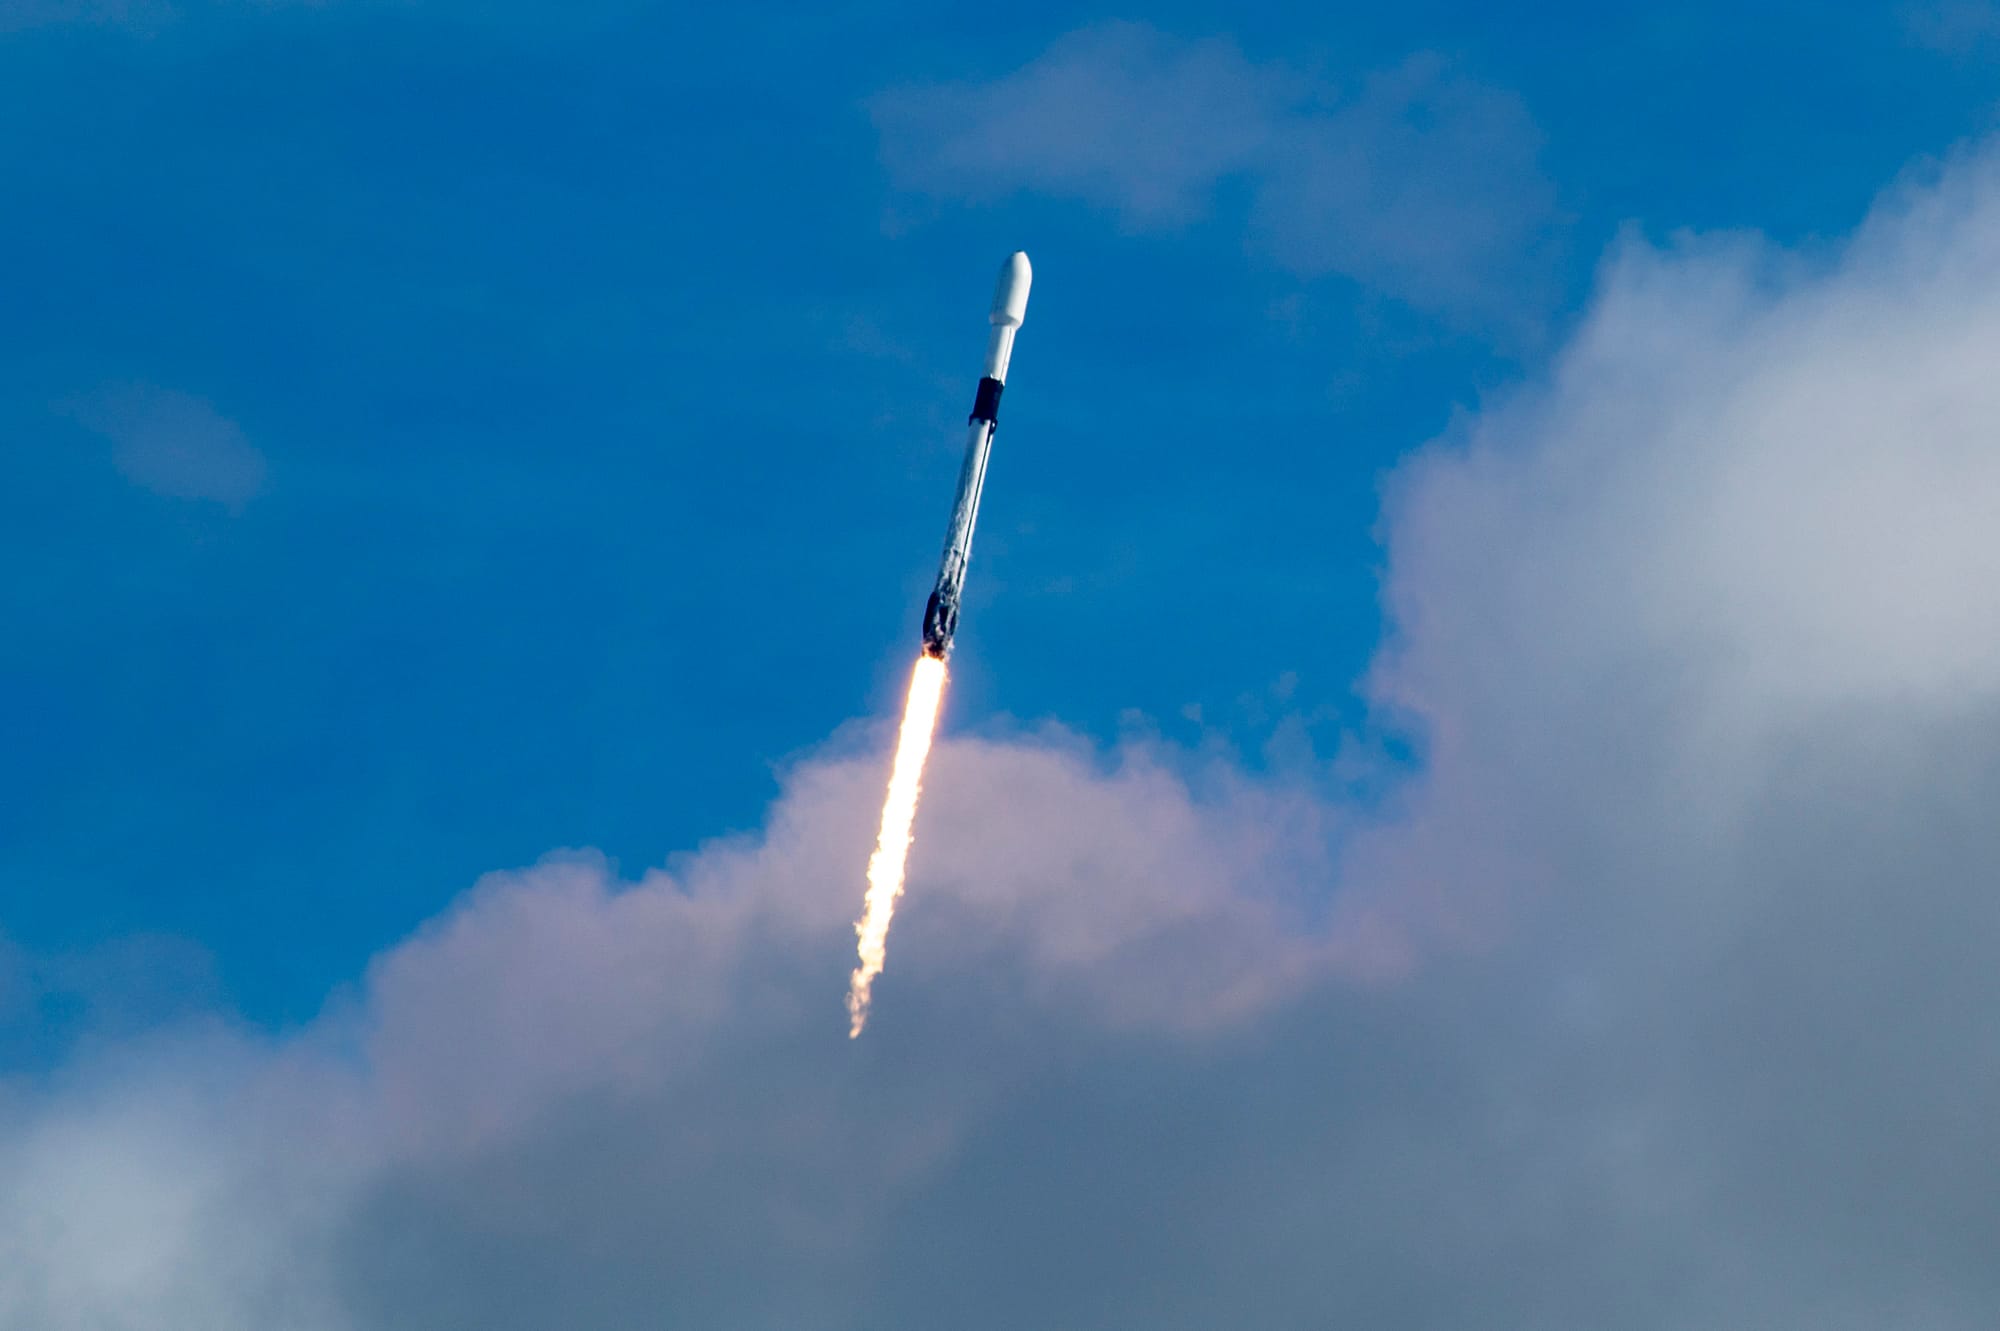 B1058 during first-stage flight for the Transporter 1 mission. ©SpaceX